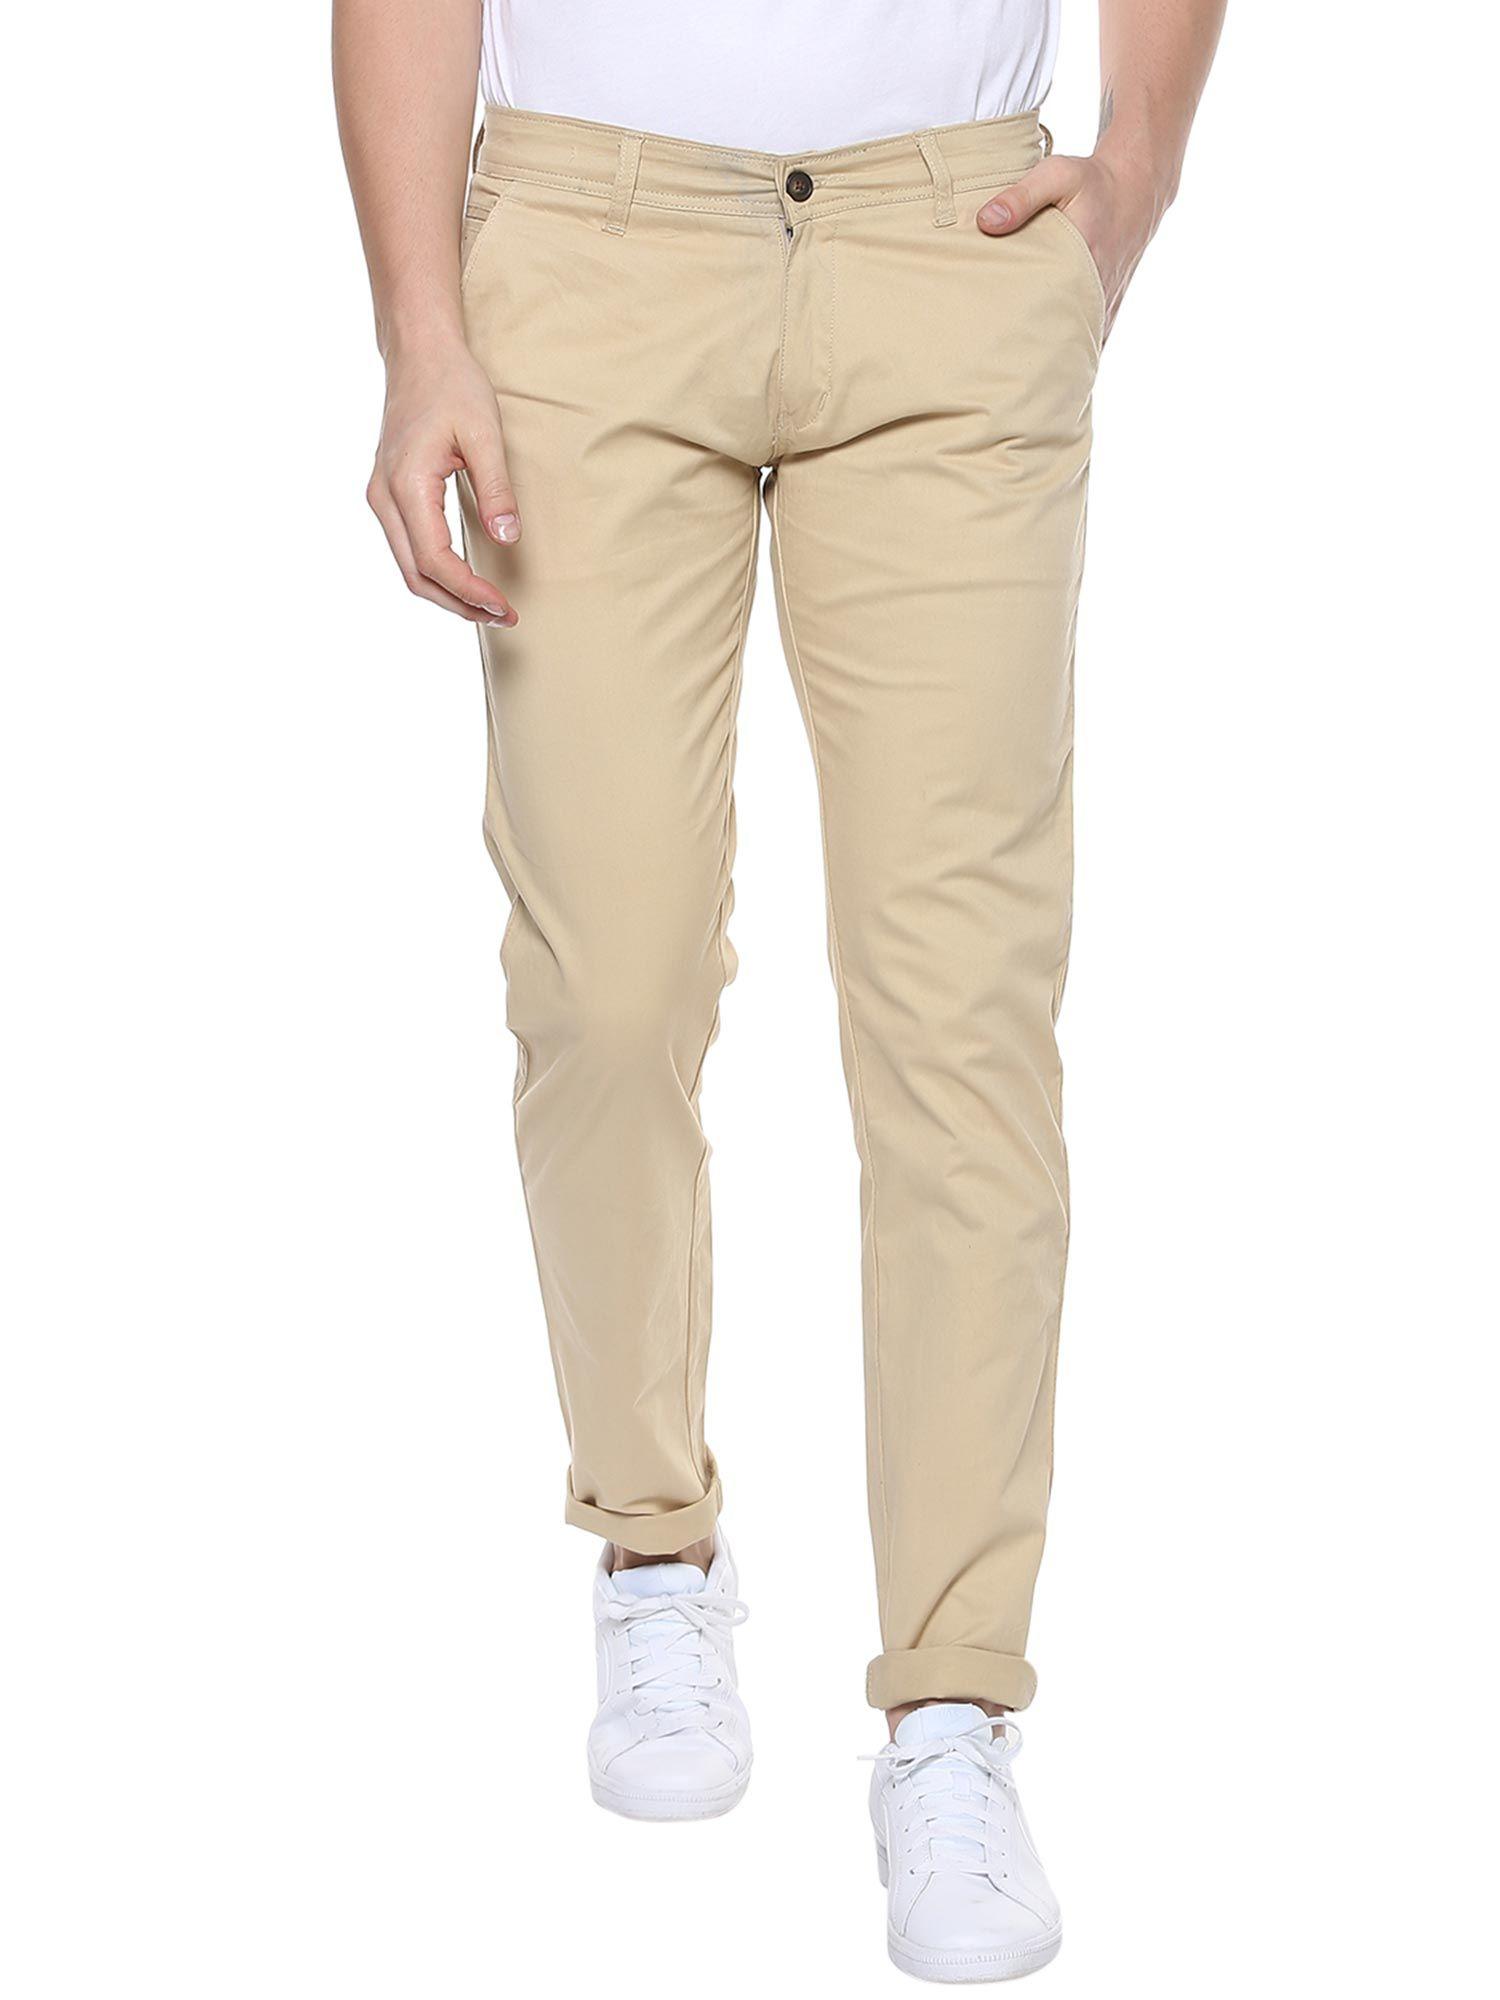 men-cream-cotton-slim-fit-casual-chinos-trousers-stretch